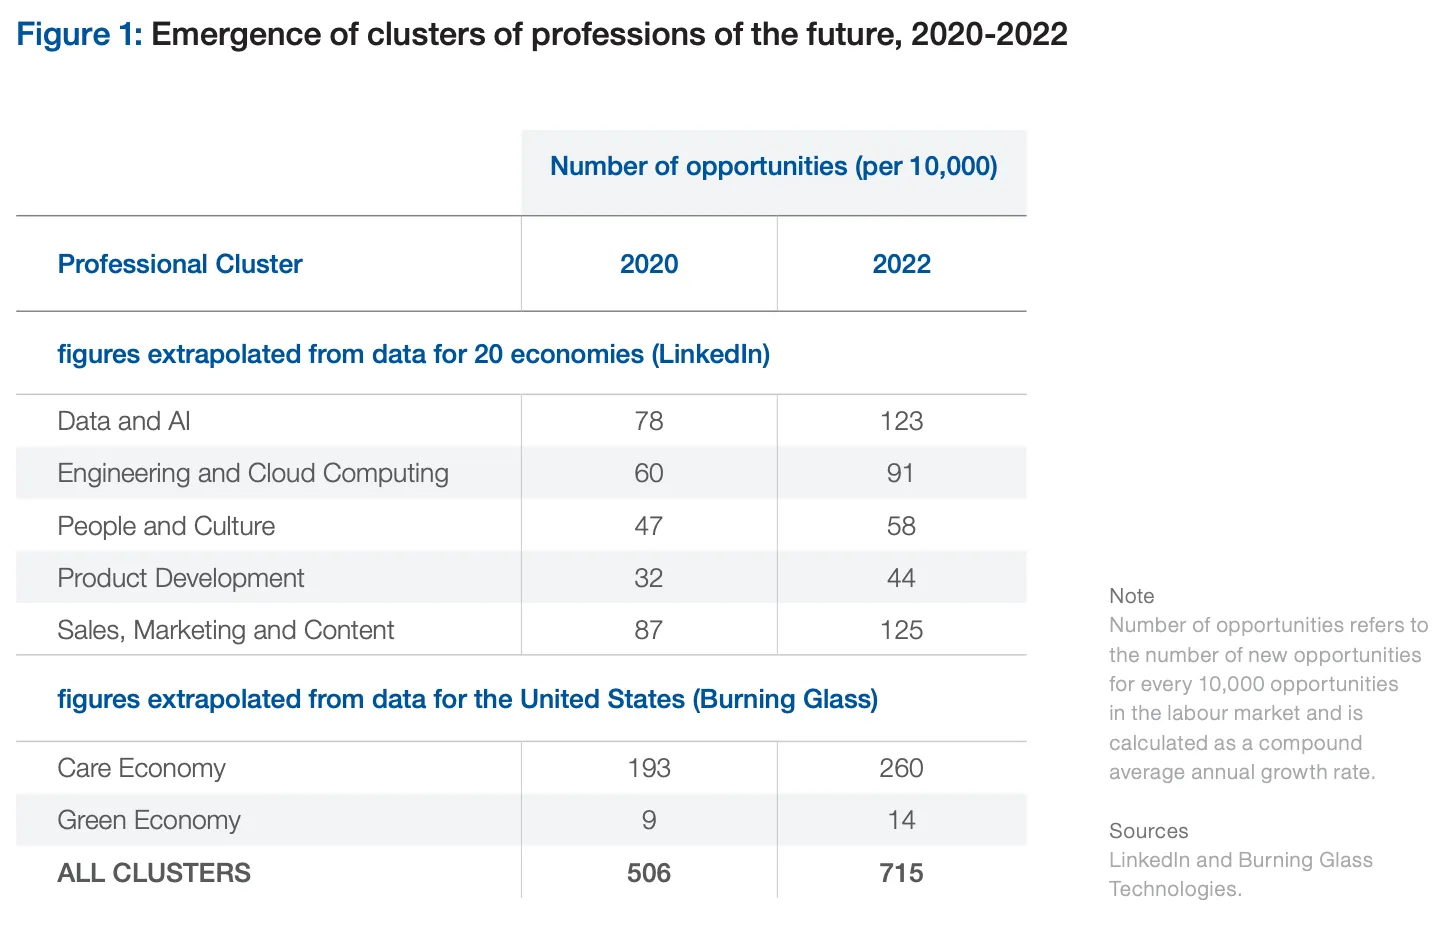 table showing stats on the emergence of clusters of professions of the future from 2020 to 2022